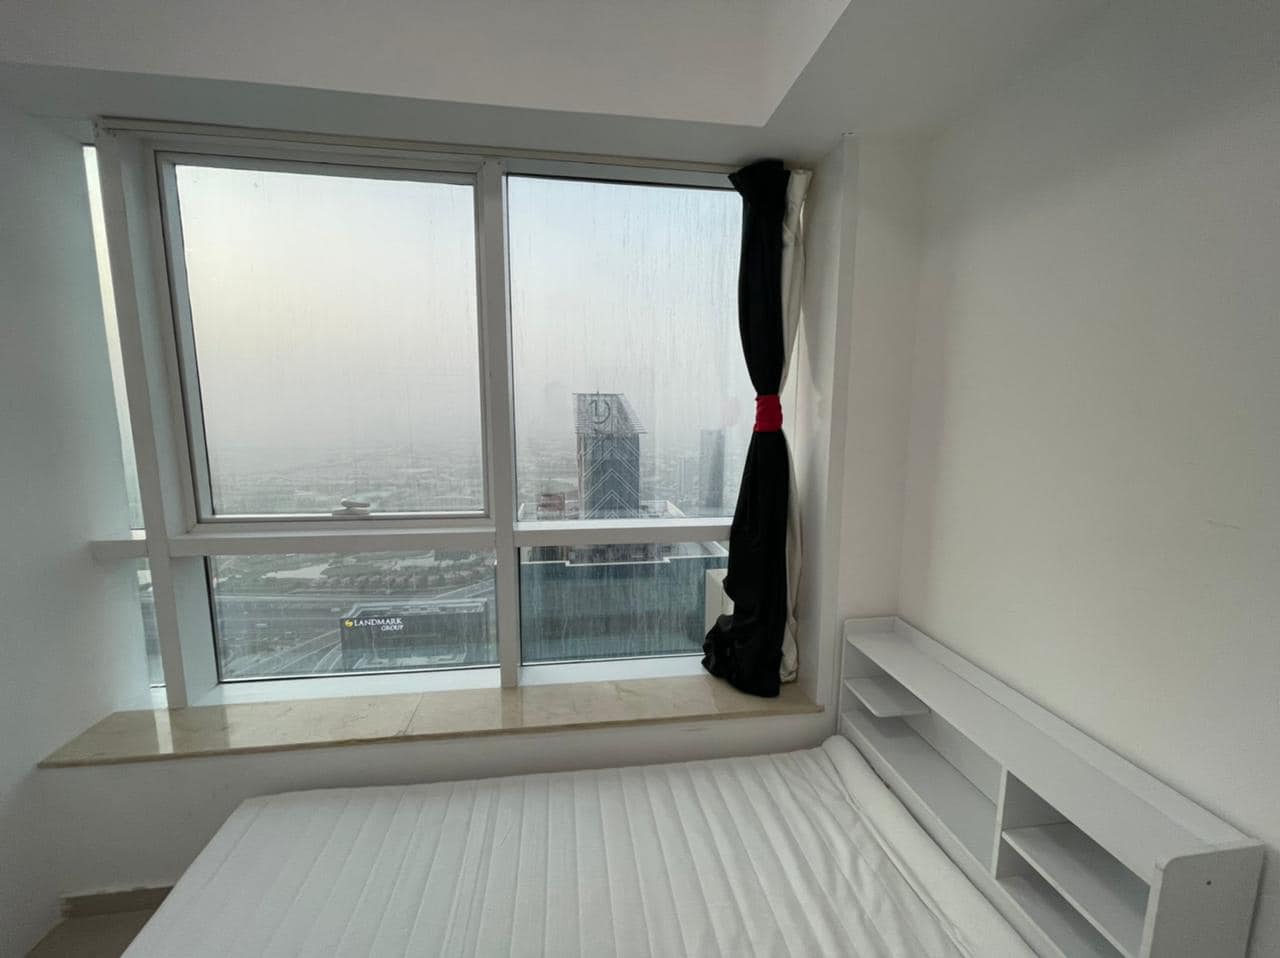 Specious Room for Rent, Amazing View, High Floor, Prime location Close to Tram